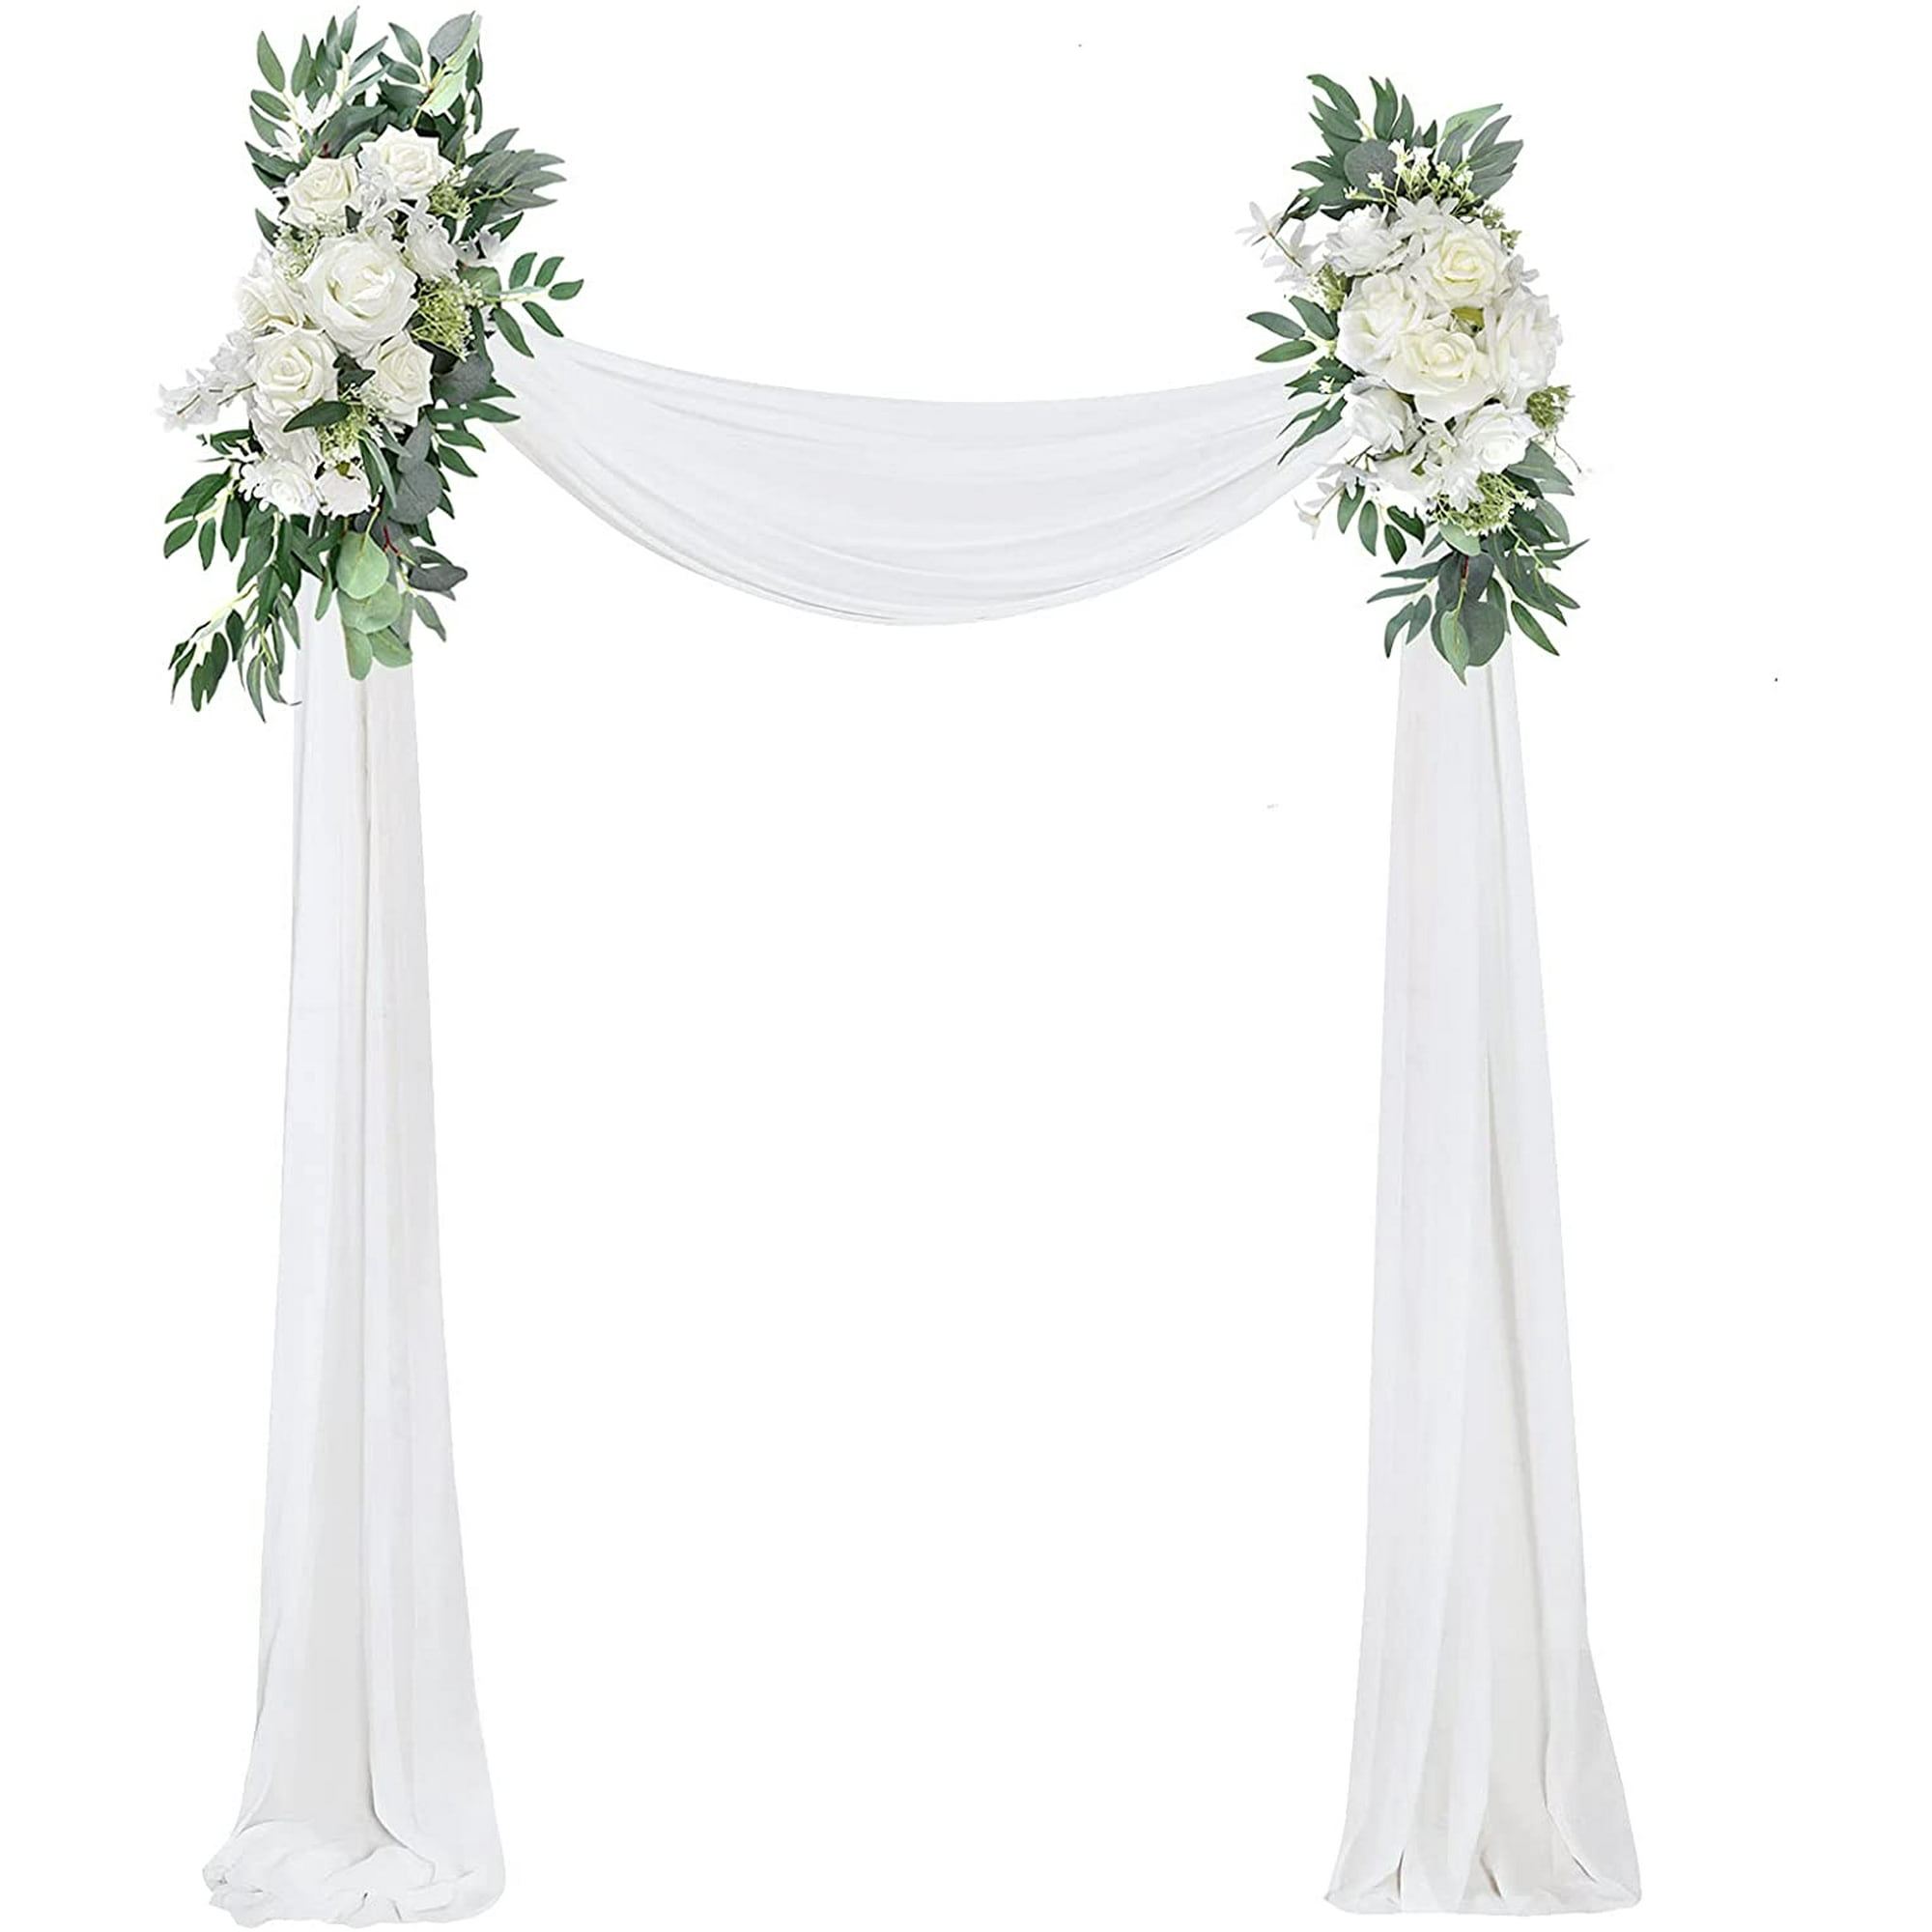 Wedding Arch Artificial Flowers Kit (Pack of 3) 2 Pack Ivory Greenery Floral  Arrangement with White Chiffon Drapery Fabric for Ceremony Party Reception Backdrop  Decorations | Walmart Canada